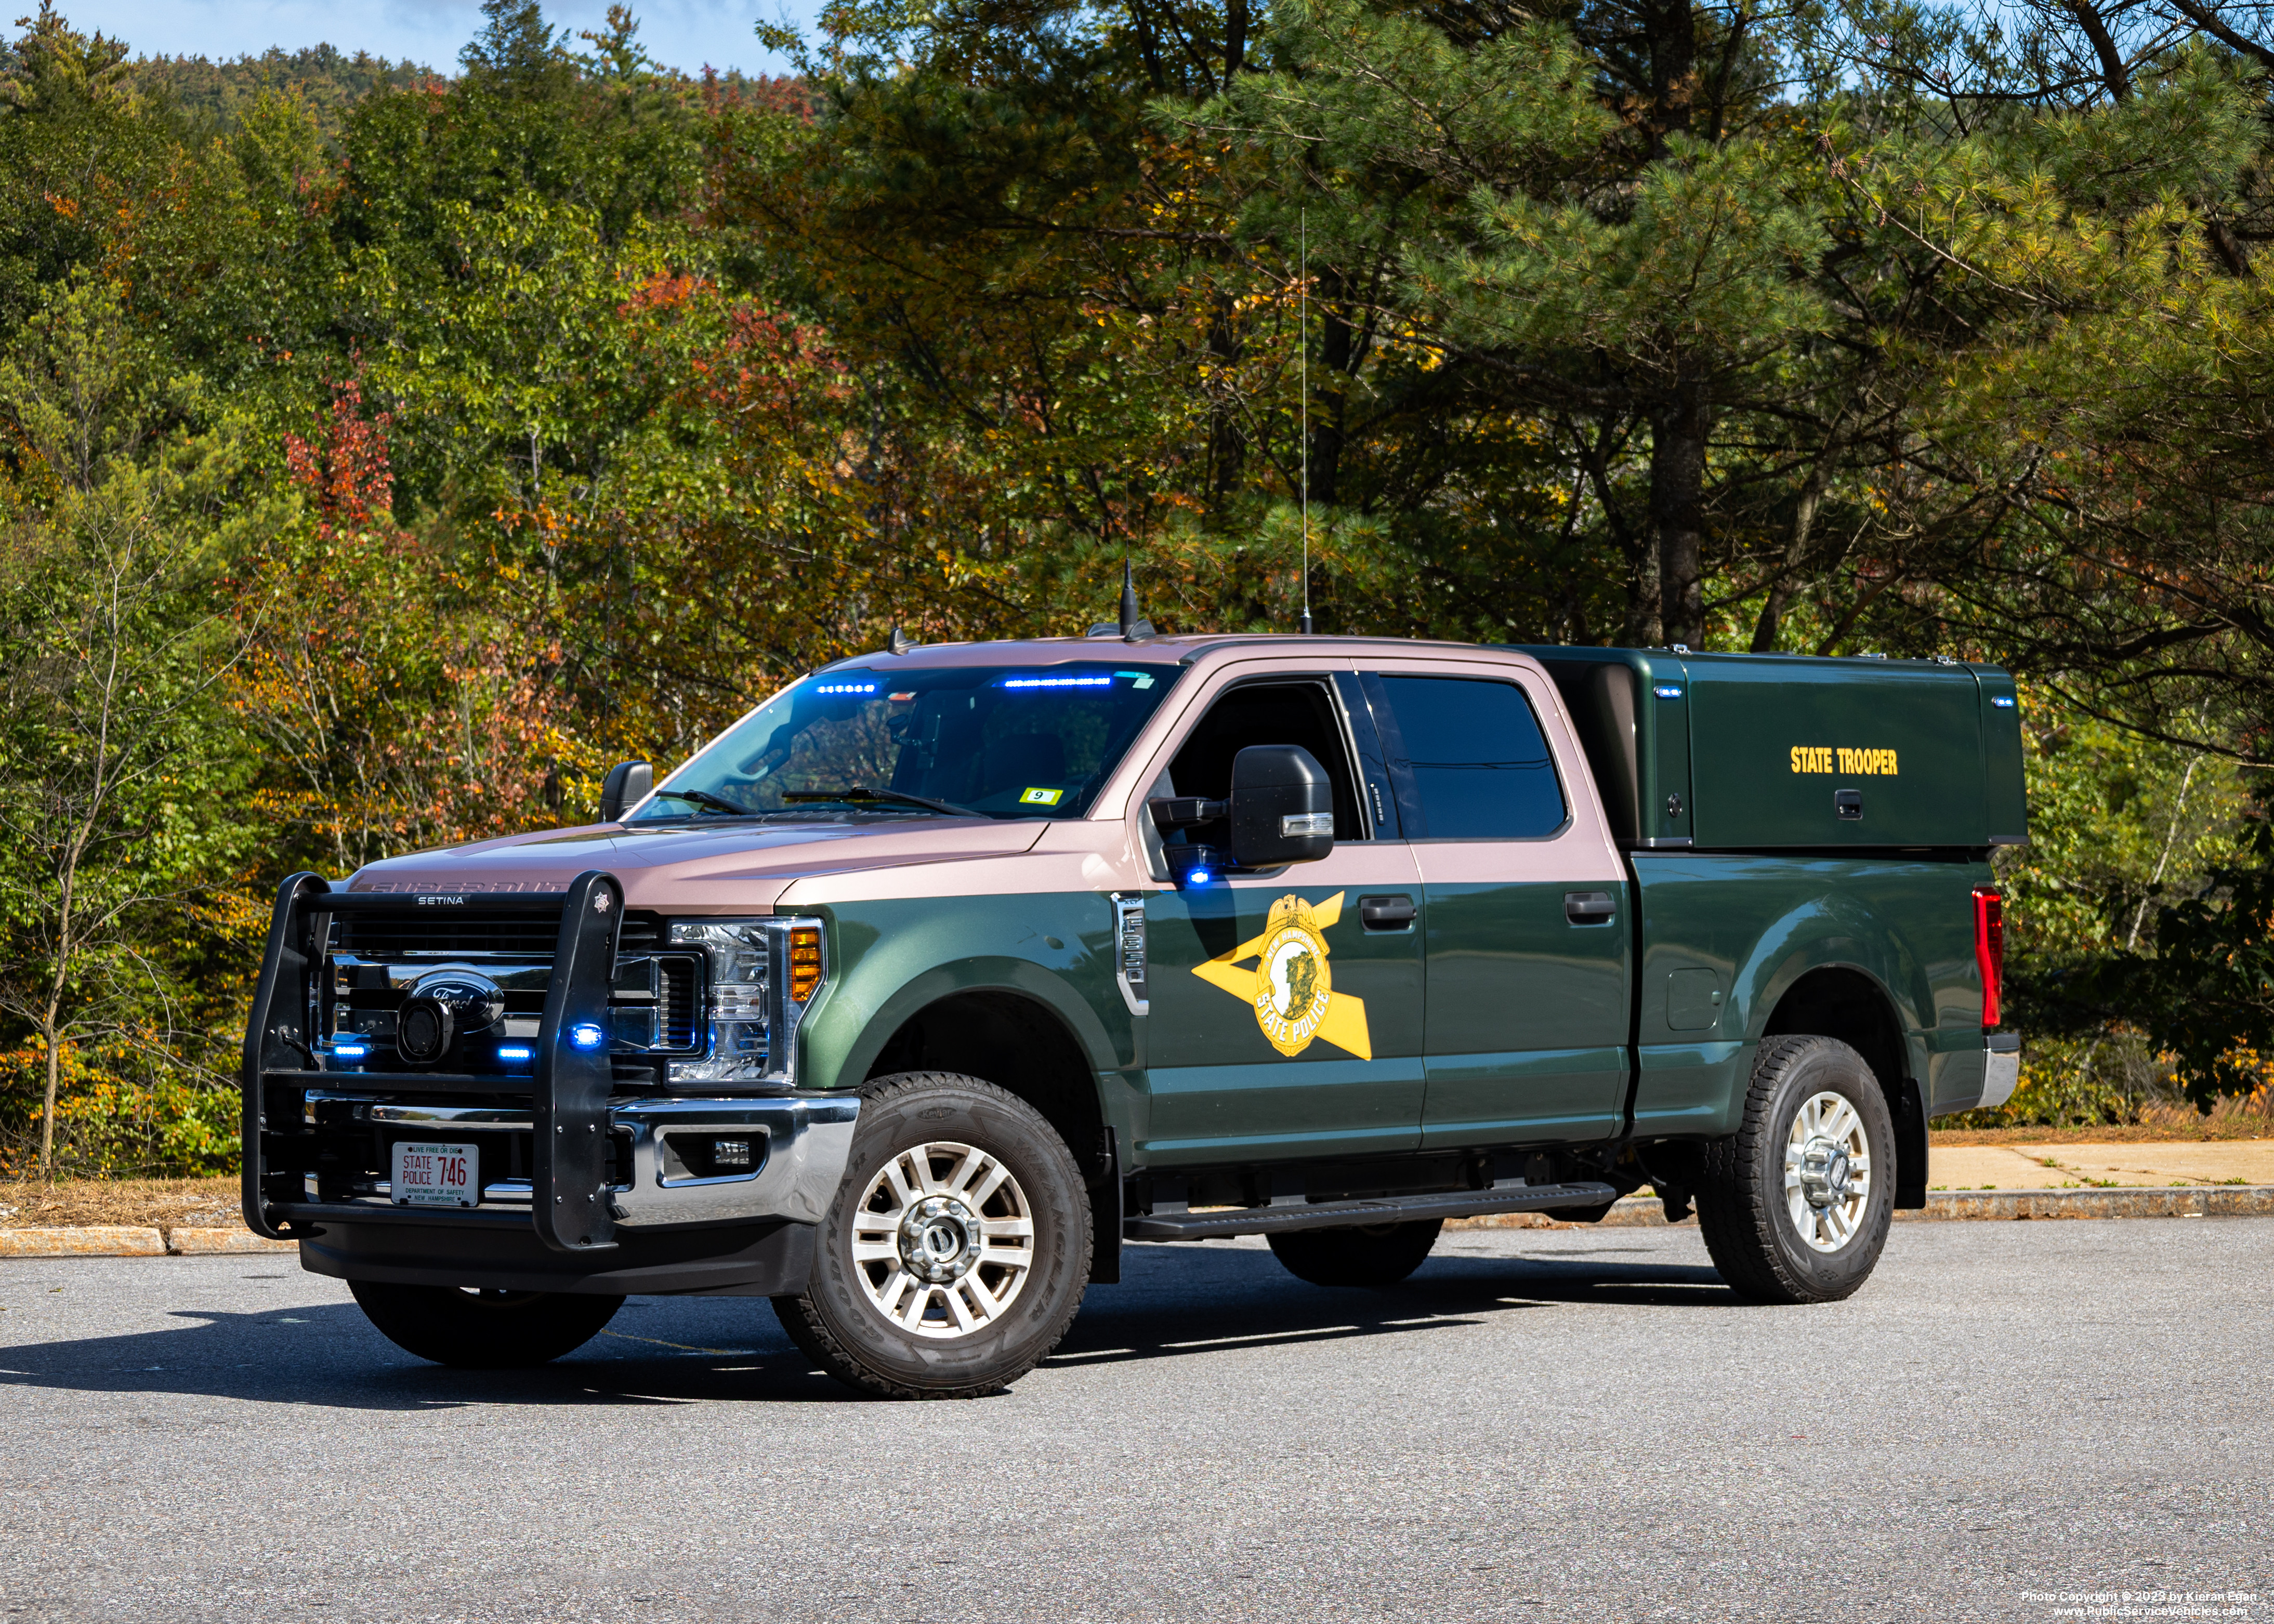 A photo  of New Hampshire State Police
            Cruiser 746, a 2017-2019 Ford F-350 XL Crew Cab             taken by Kieran Egan